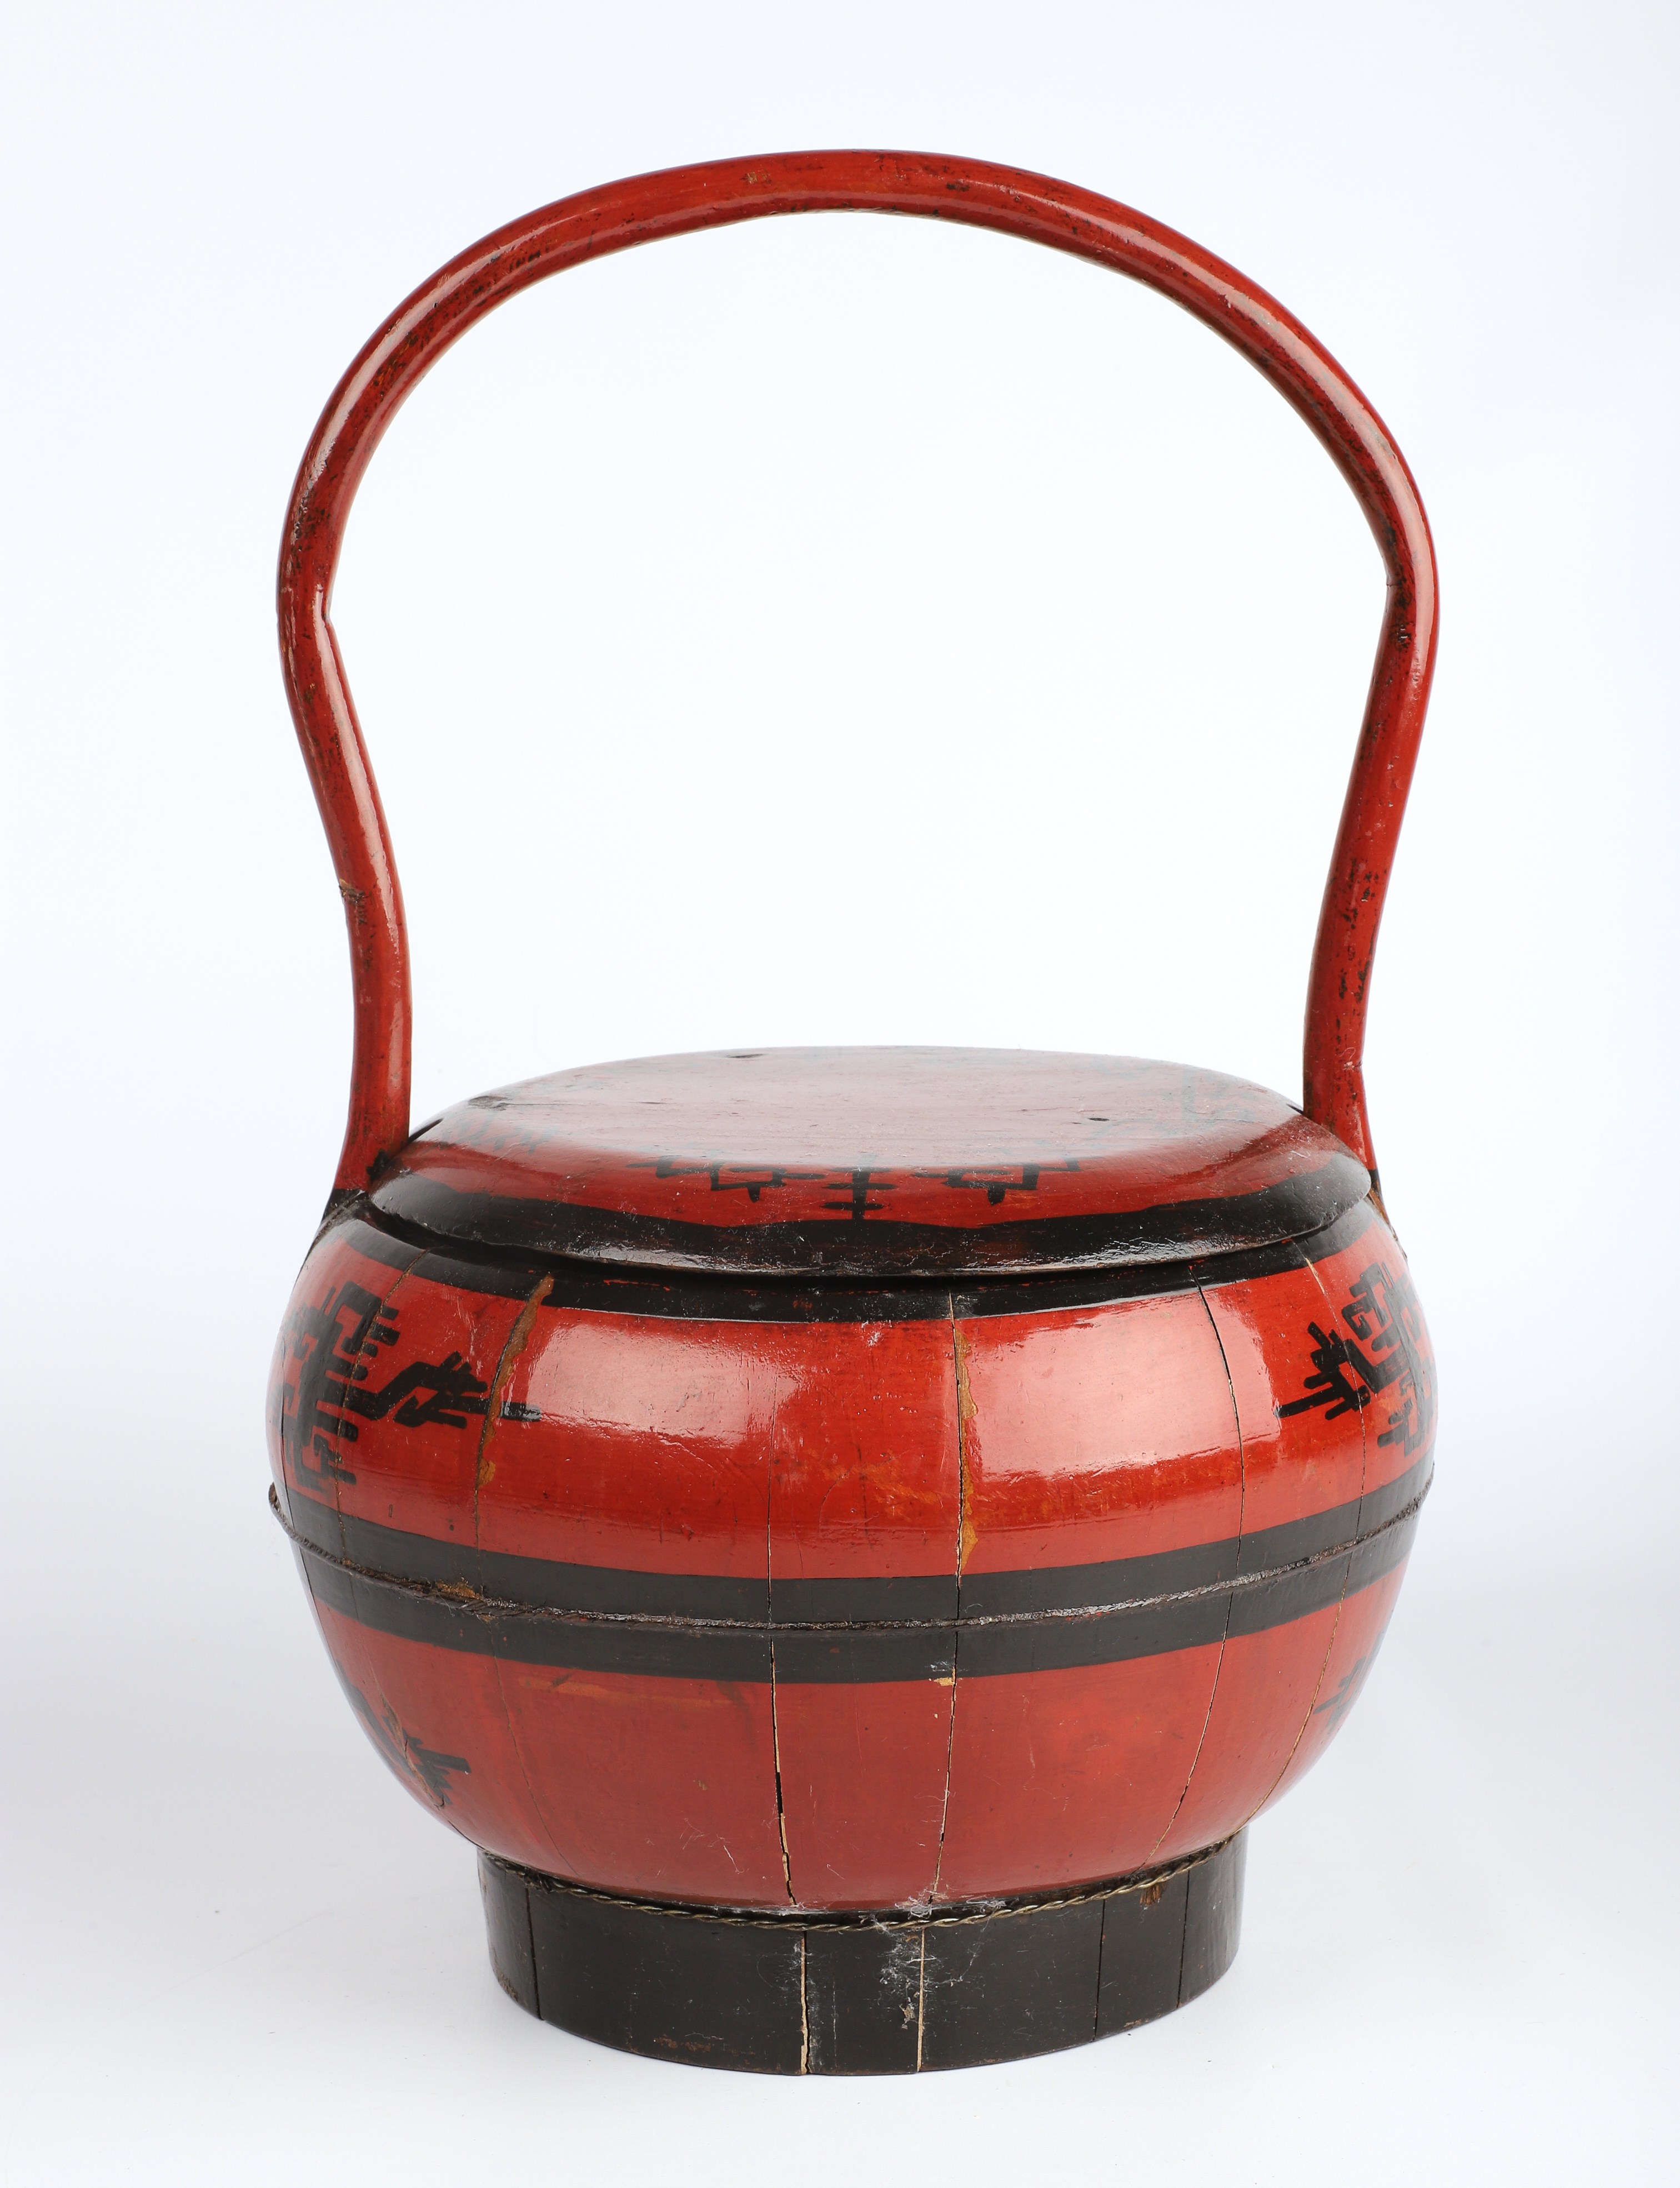 Chinese lacquer covered basket  3b1458